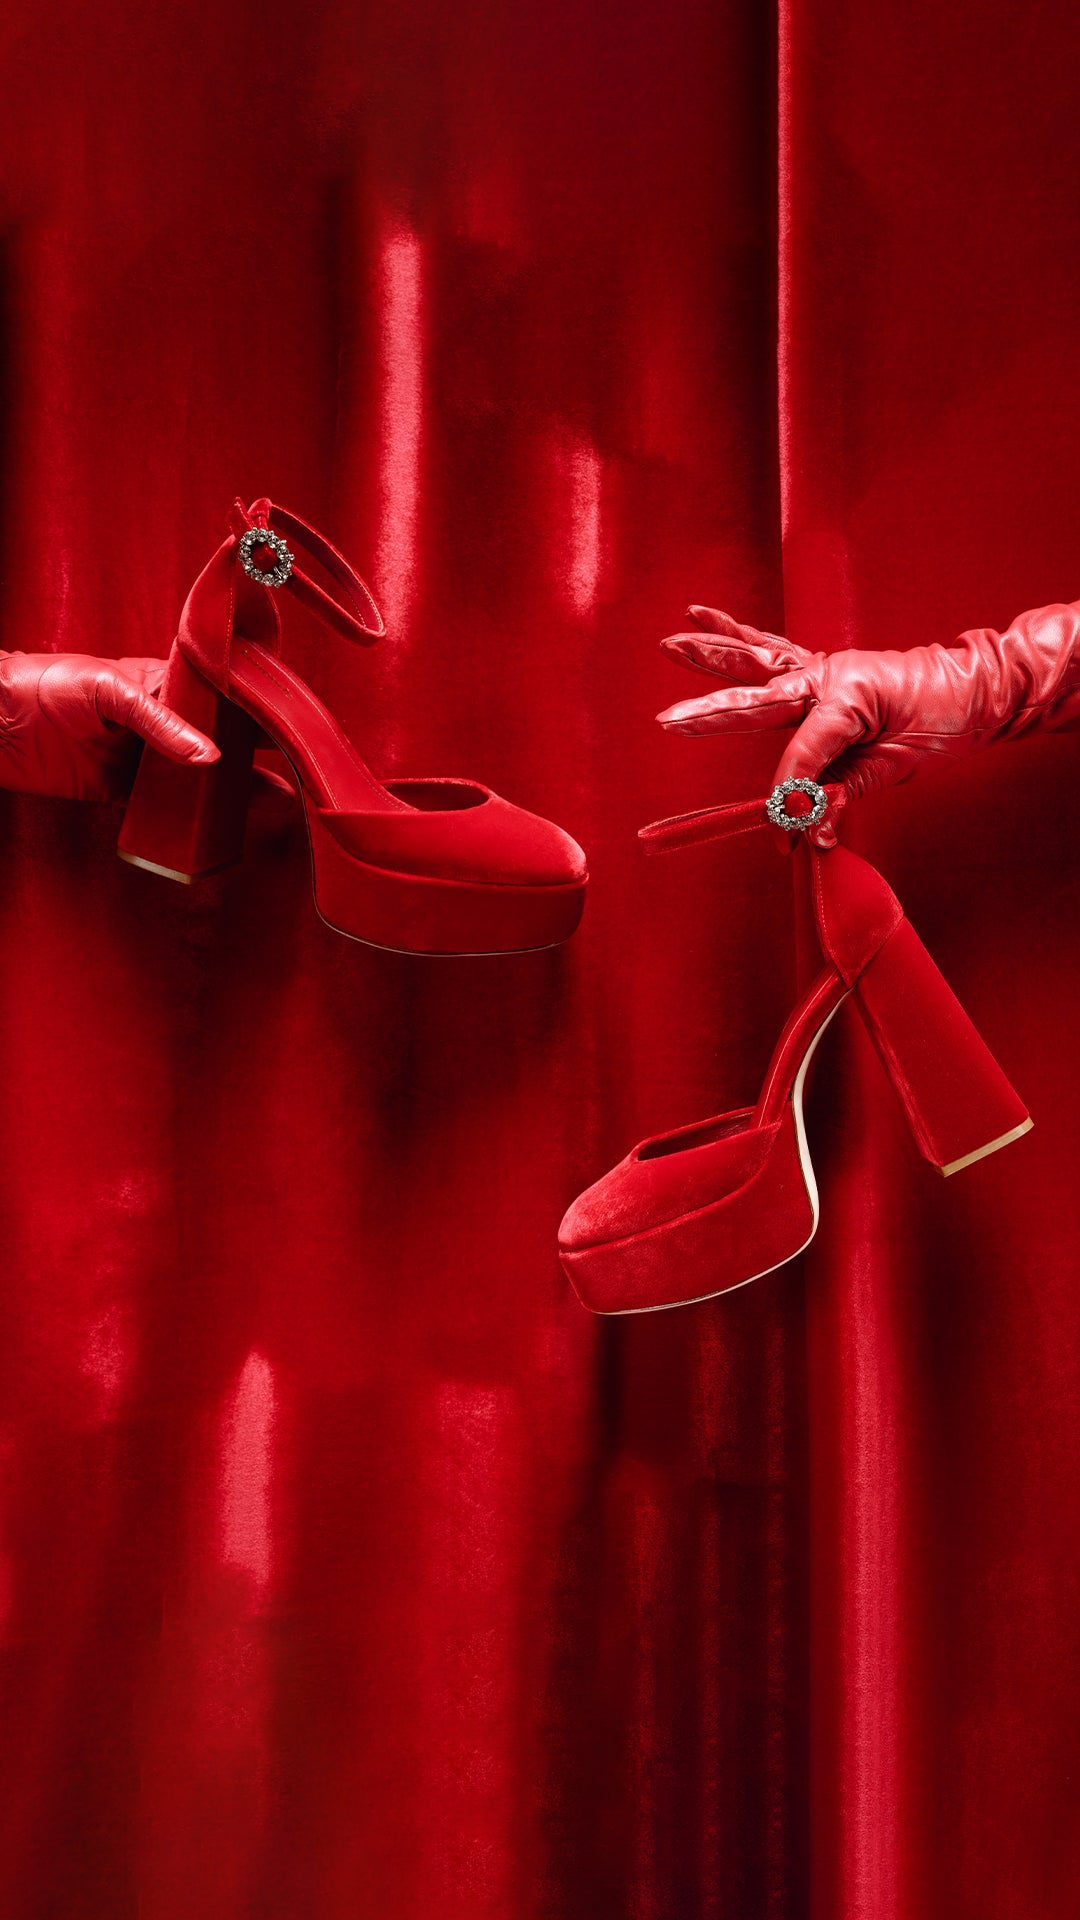 Everything You Need to Know About Larroudé's High Heel Collab With Sup -  Larroude